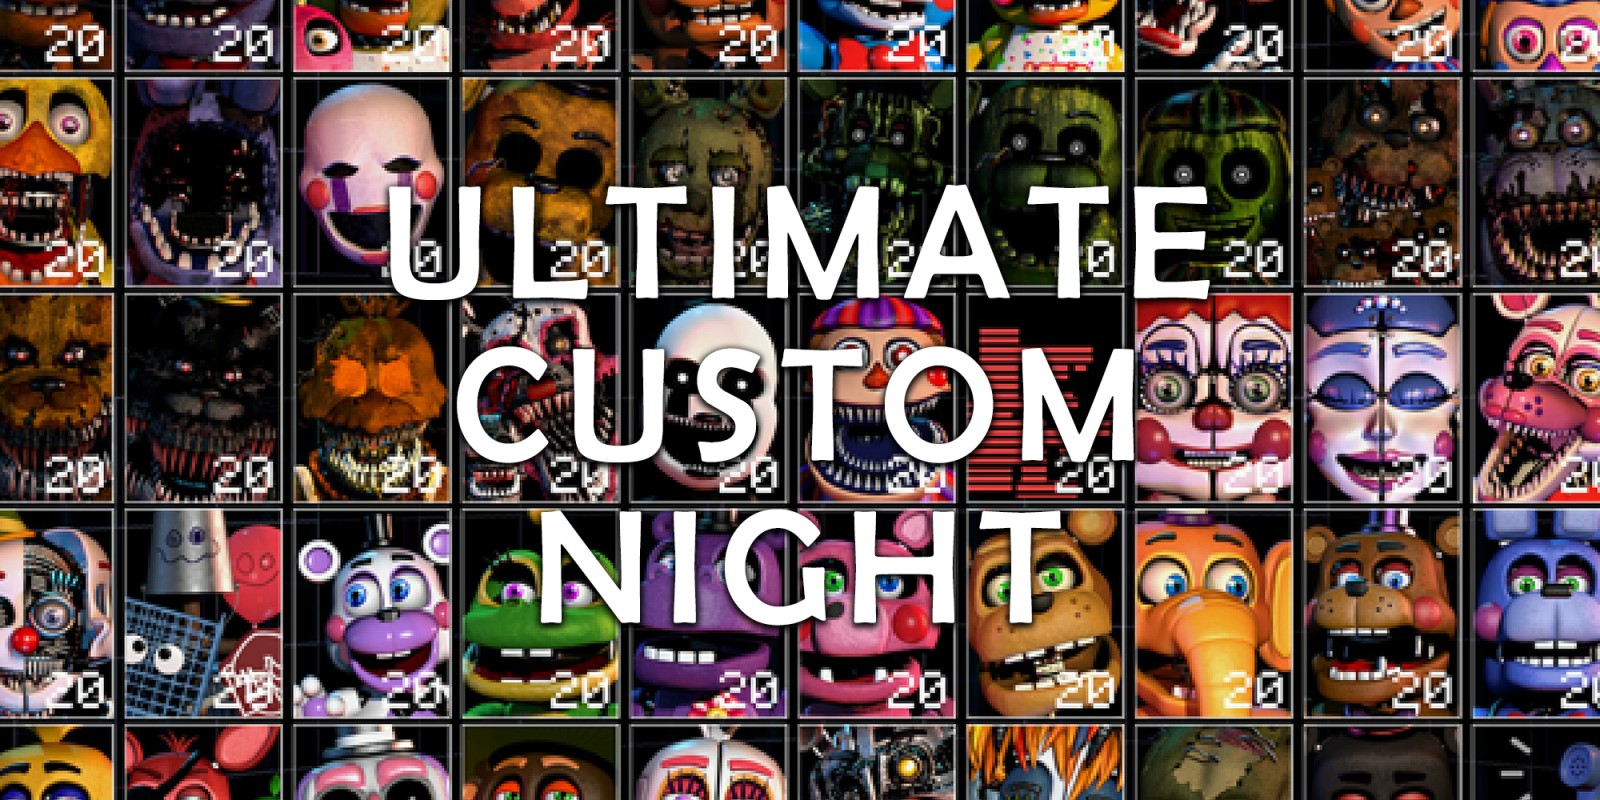 download custom nights for free